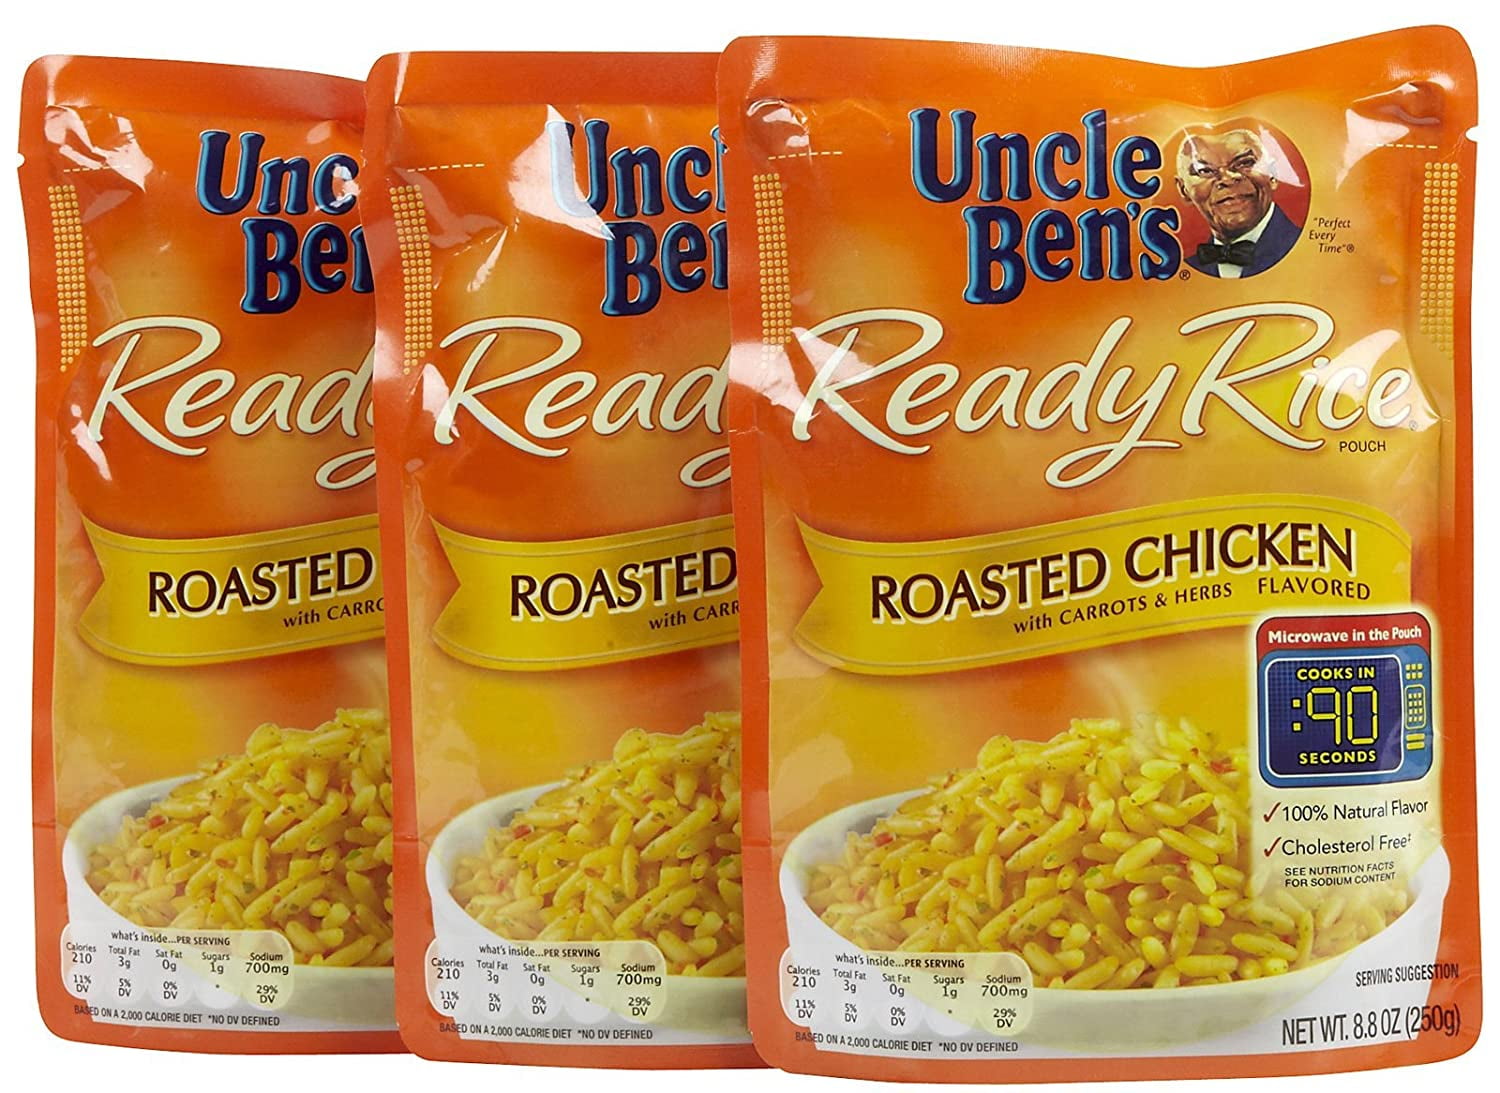  BEN'S ORIGINAL Ready Rice Roasted Chicken Flavored Rice, Easy  Dinner Side, 8.8 OZ Pouch (Pack of 12) : Brown Rice Produce : Grocery &  Gourmet Food